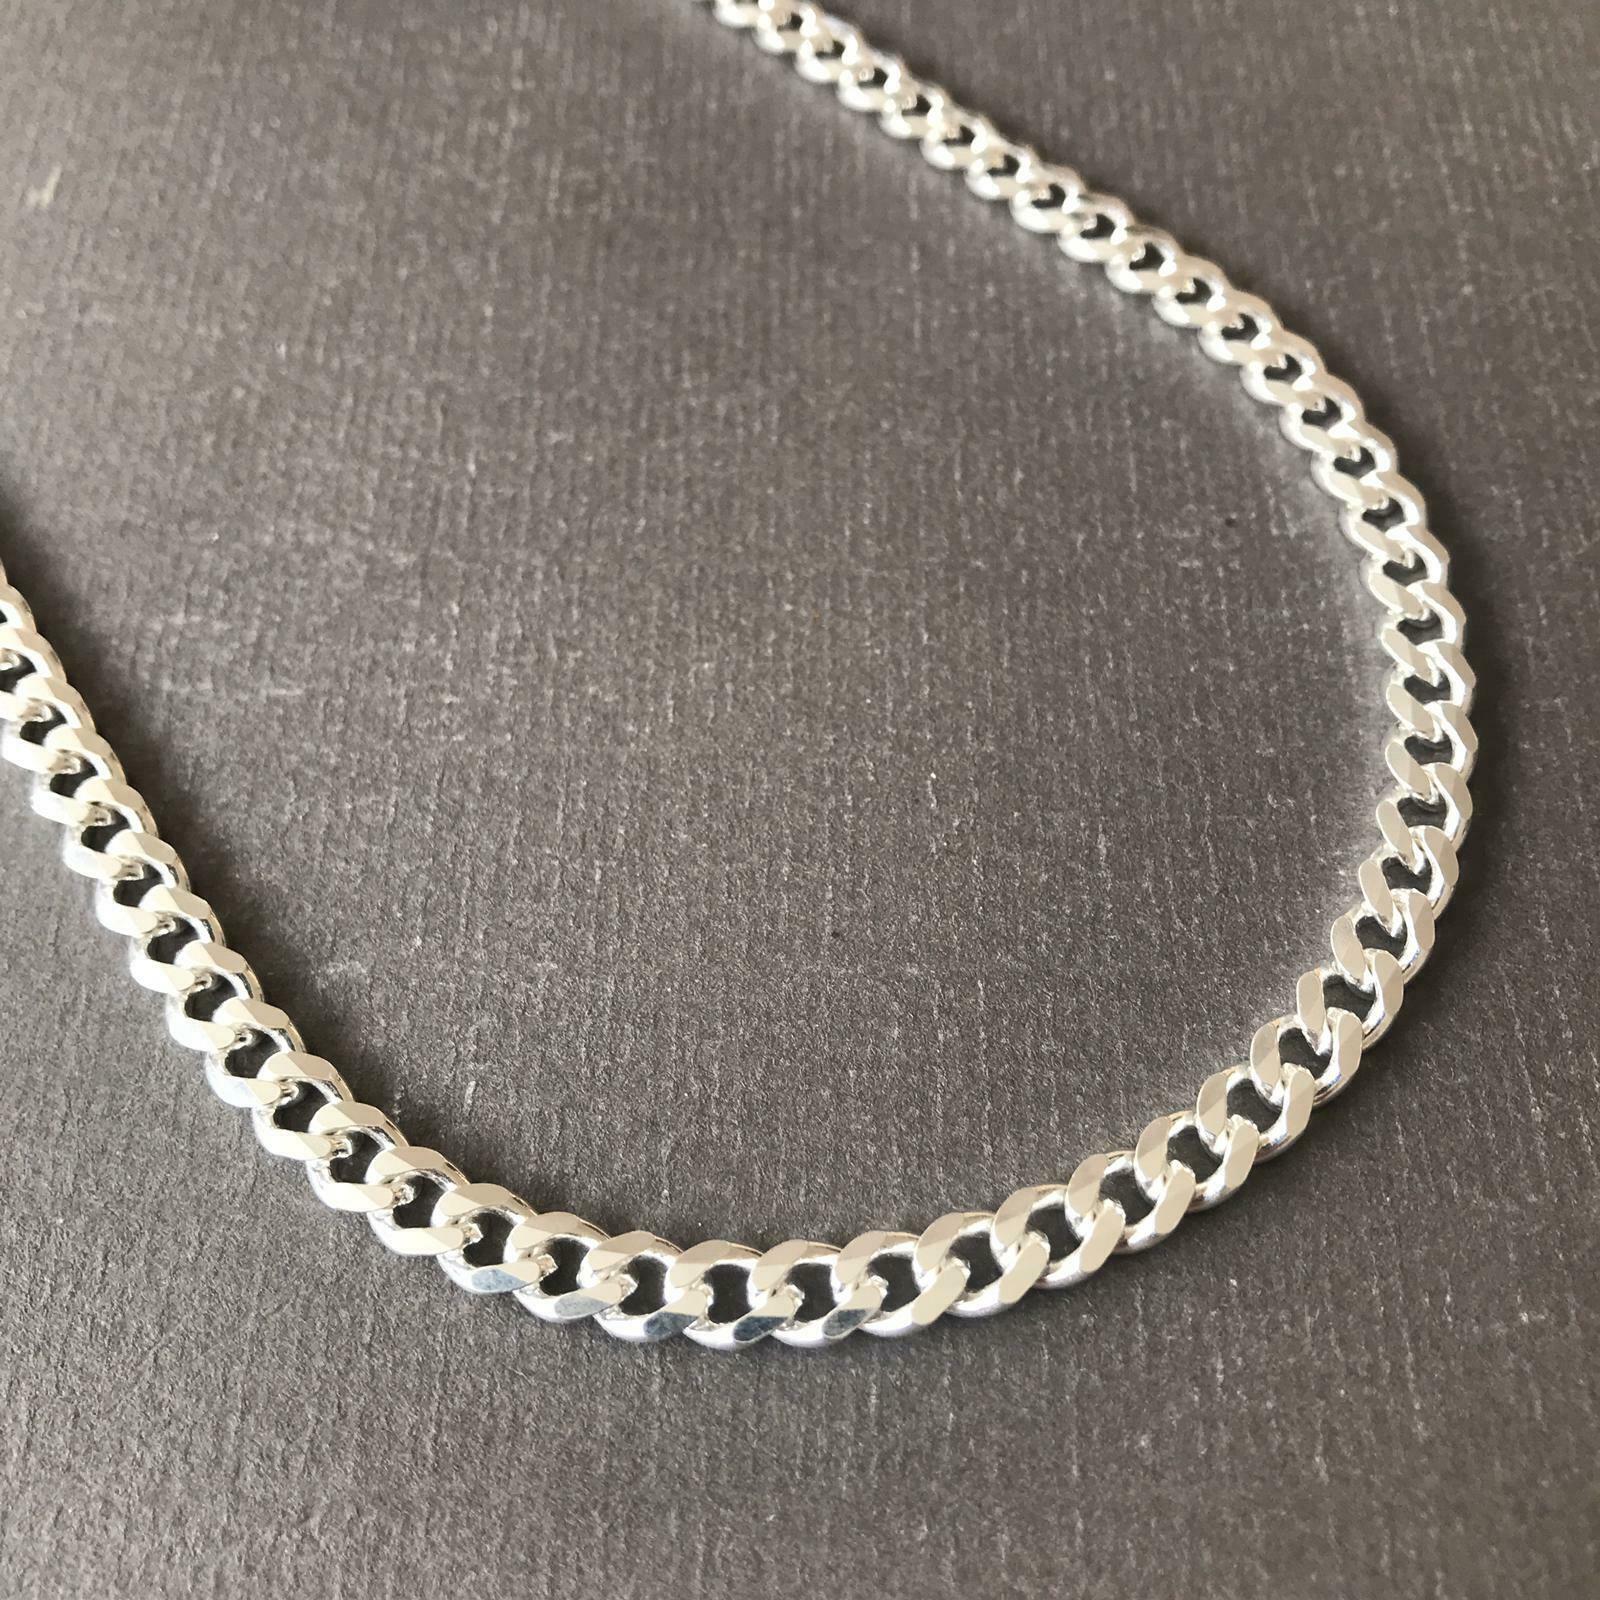 Men's Cuban Tight Curb Link Chain Necklace